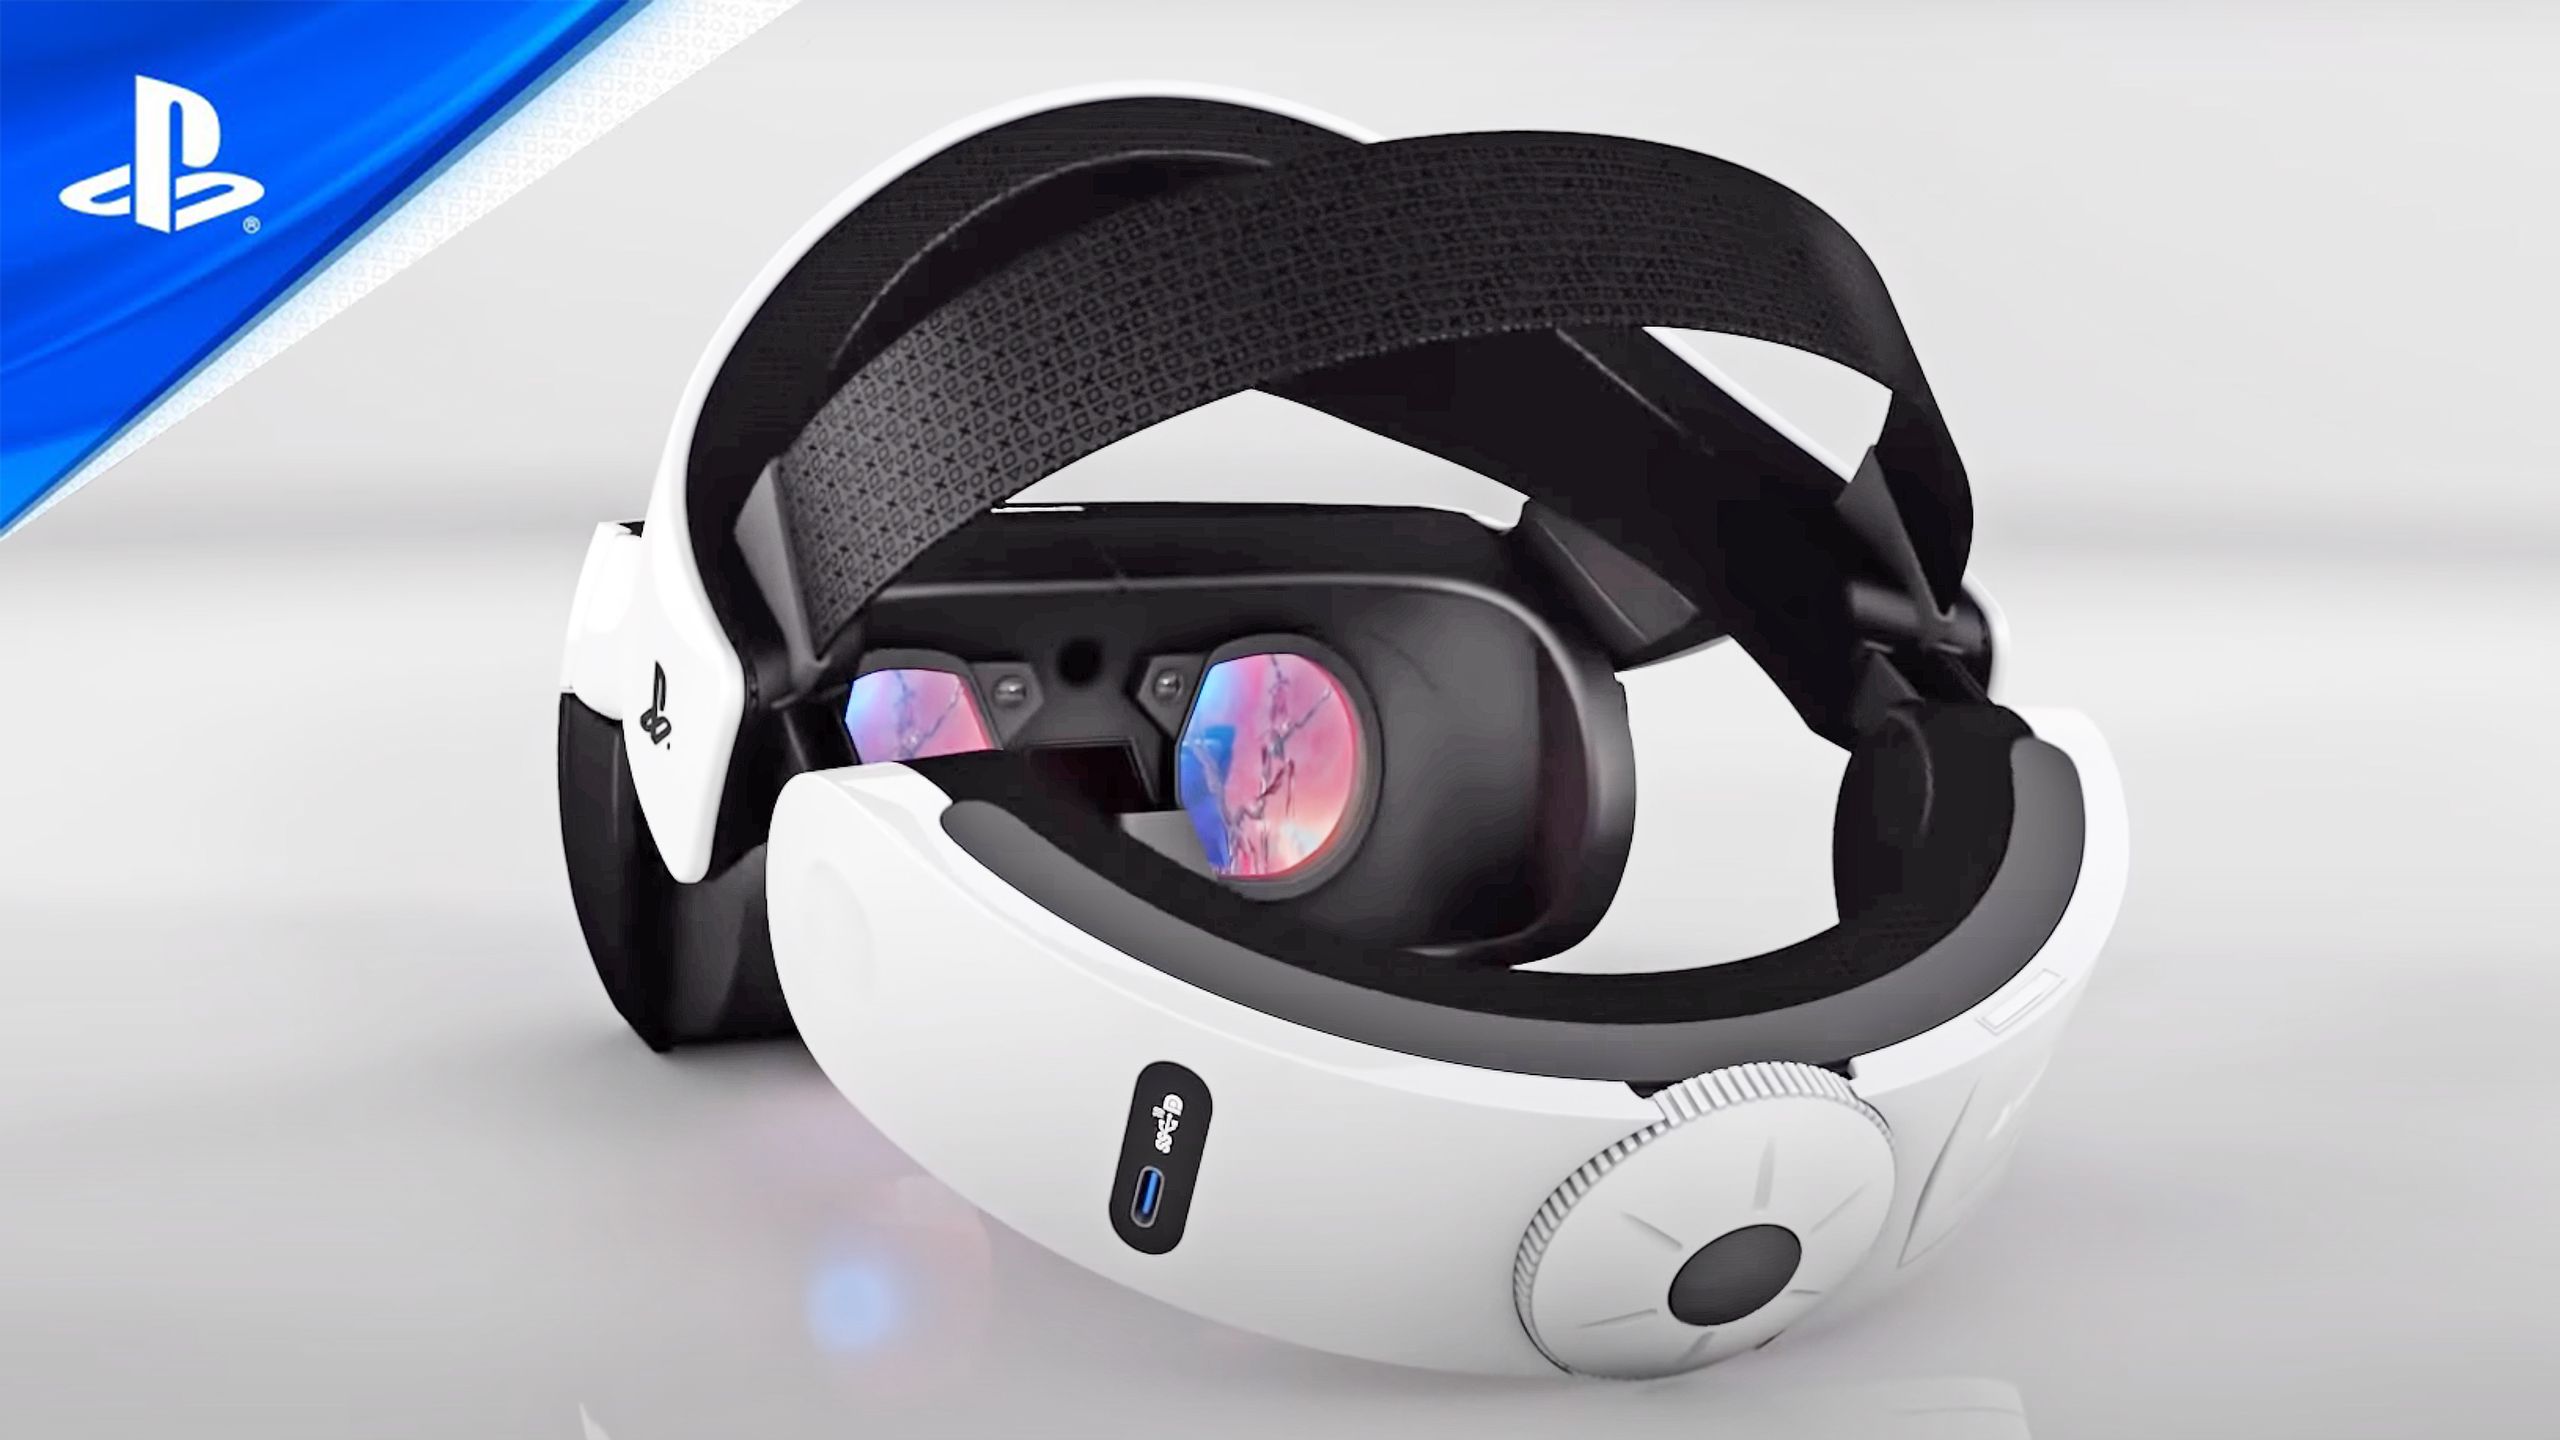 sony playstation vr headset core system